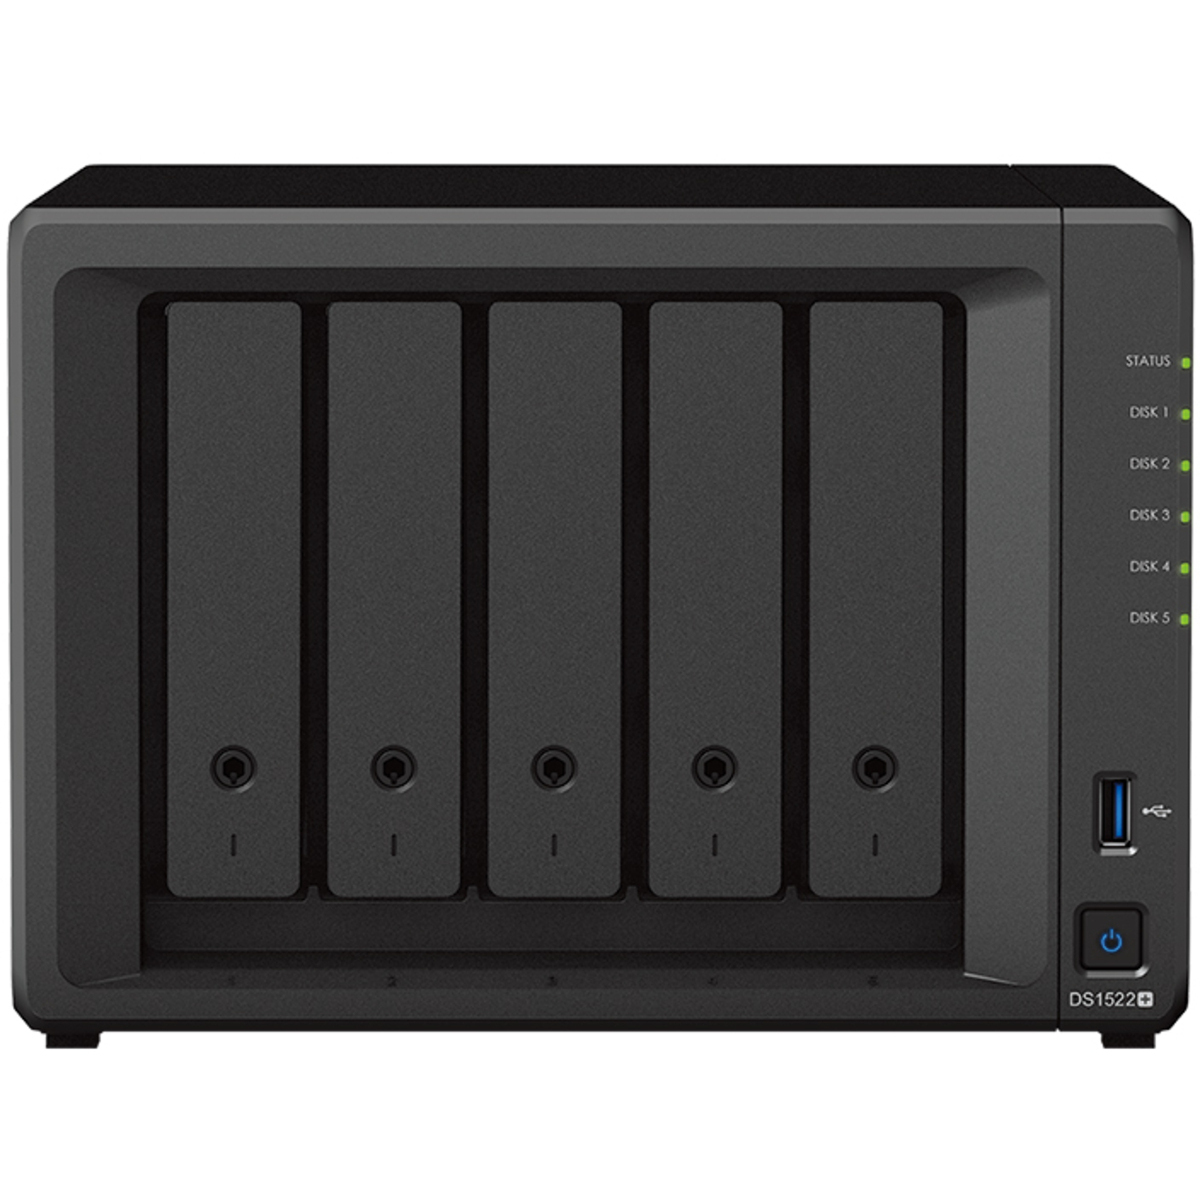 Synology DiskStation DS1522+ 50tb 5-Bay Desktop Multimedia / Power User / Business NAS - Network Attached Storage Device 5x10tb Western Digital Ultrastar DC HC330 WUS721010ALE6L4 3.5 7200rpm SATA 6Gb/s HDD ENTERPRISE Class Drives Installed - Burn-In Tested - ON SALE DiskStation DS1522+